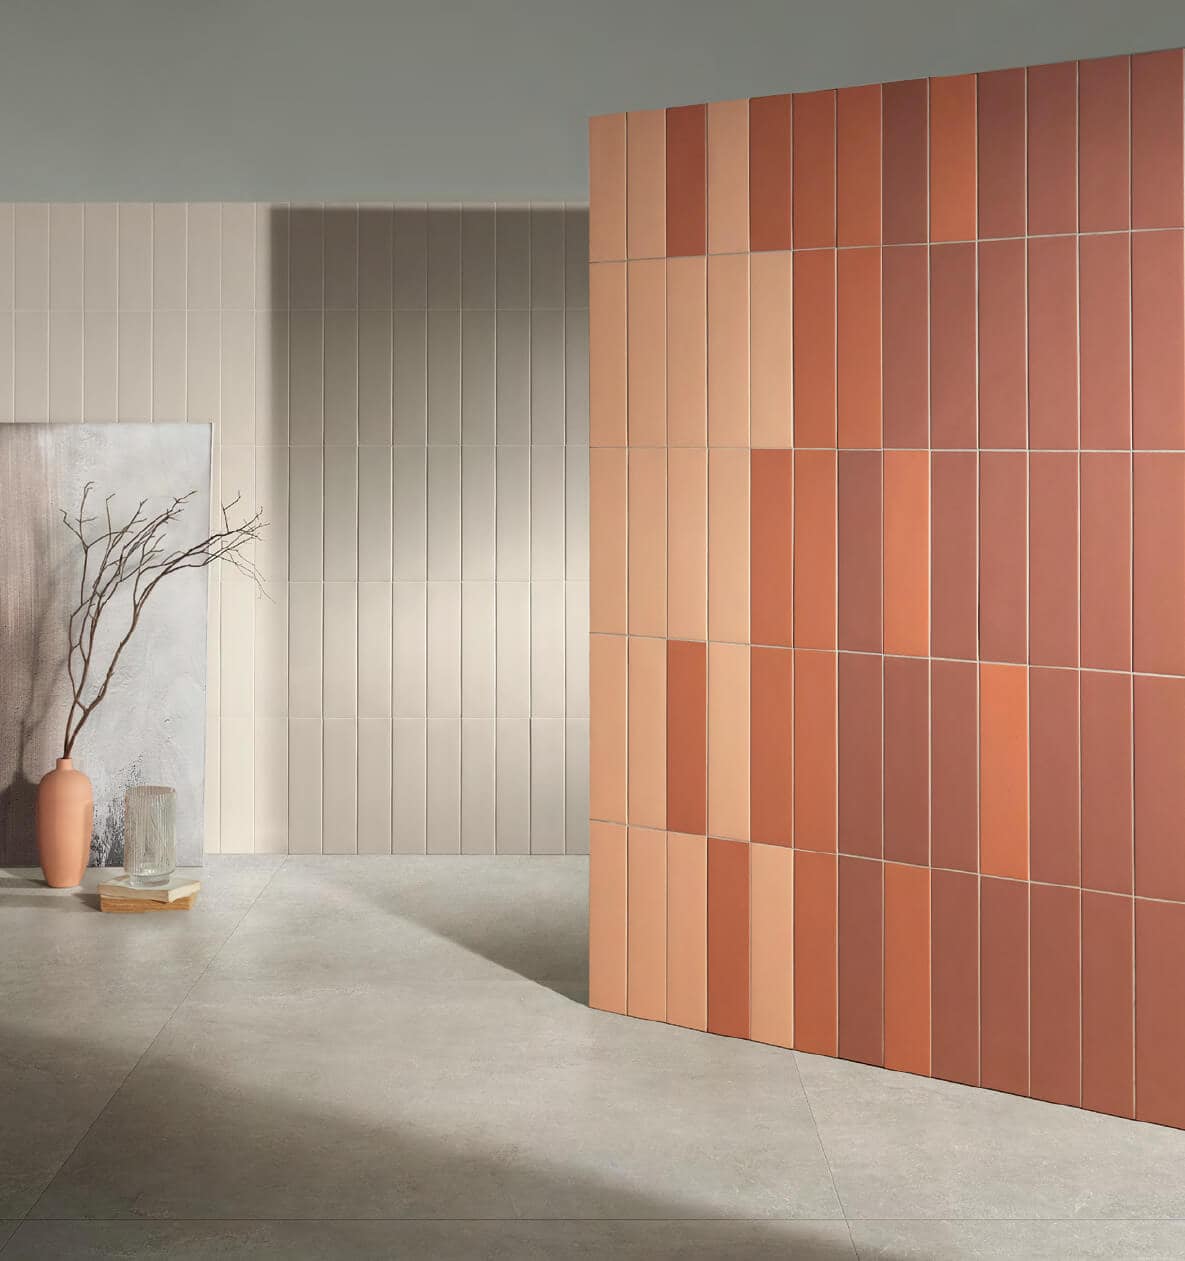 Earth-tone wall tiles in different colors